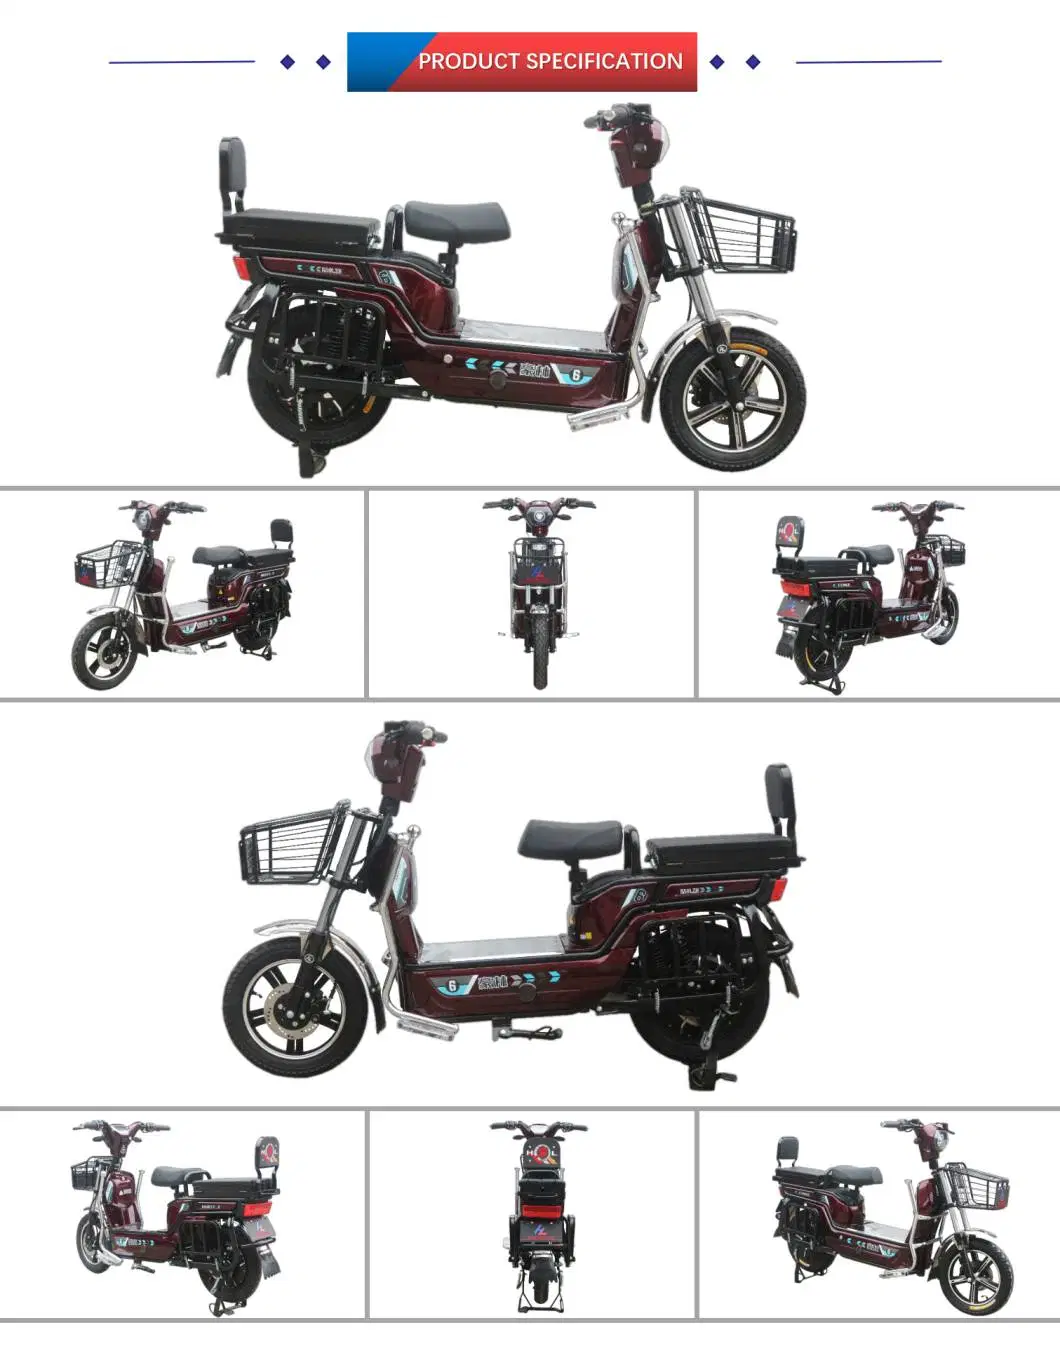 New Design Loadable Max Range 80km Electric Bike/Scooter for Cargo